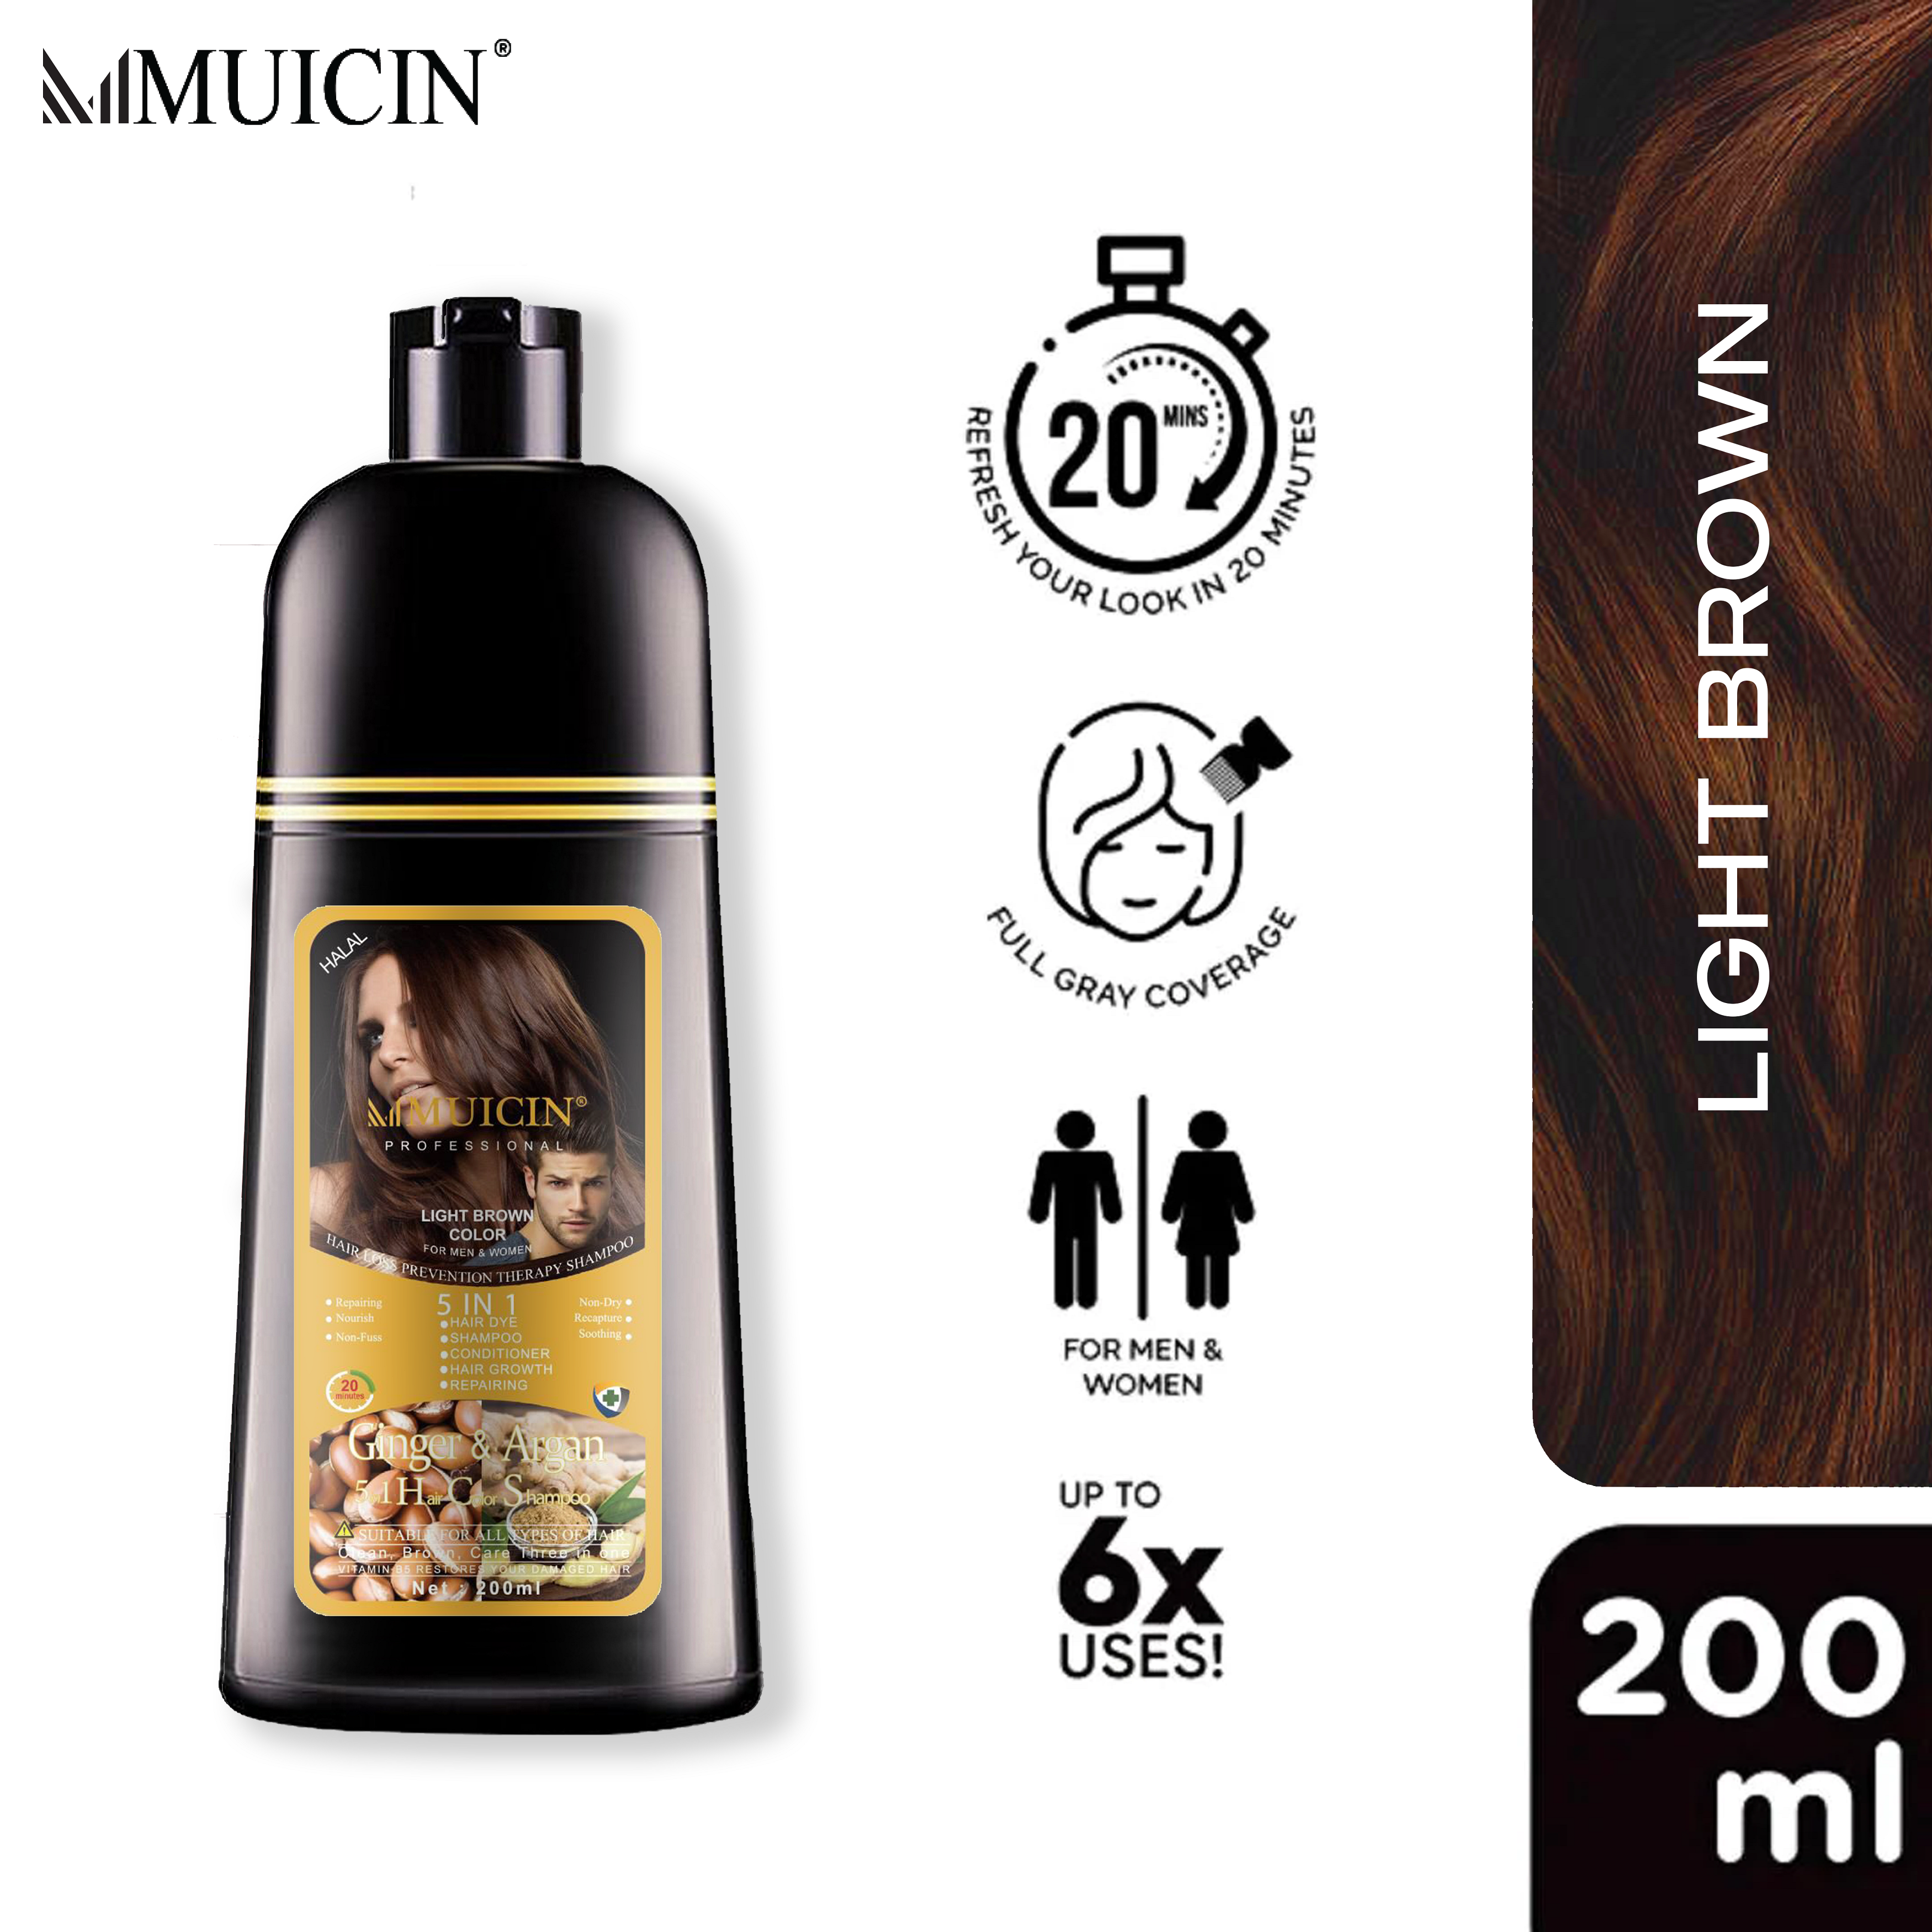 5 IN 1 HAIR COLOR SHAMPOO WITH GINGER &amp; ARGAN OIL - COLOR REFRESH &amp; REPAIR